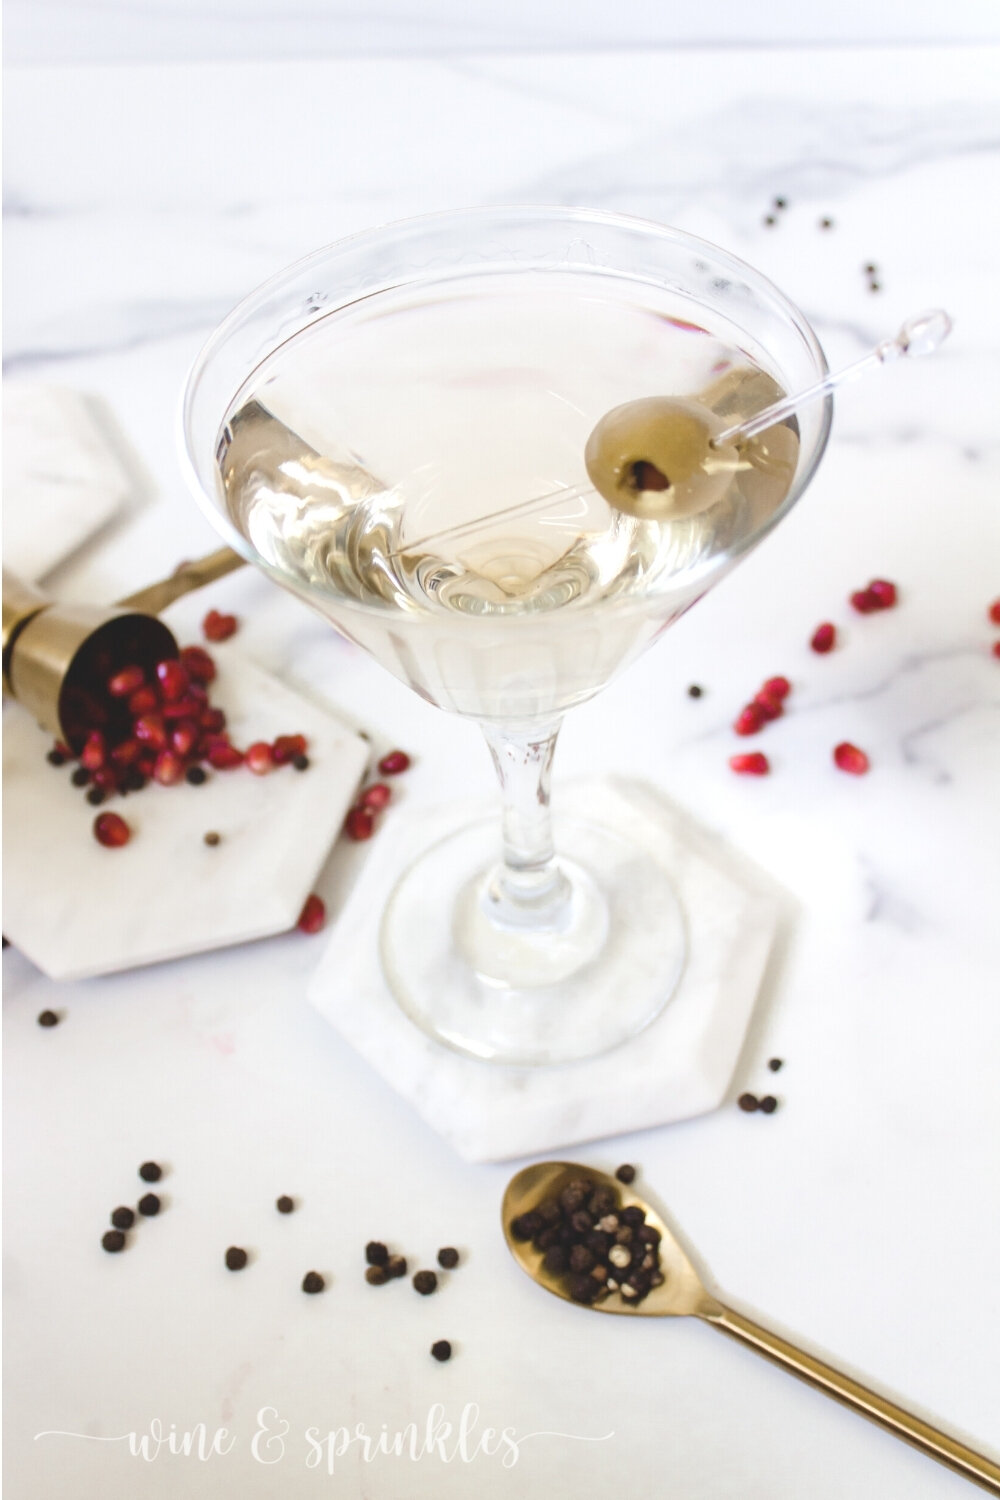 Pomegranate Pepper Infused Dirty Martini